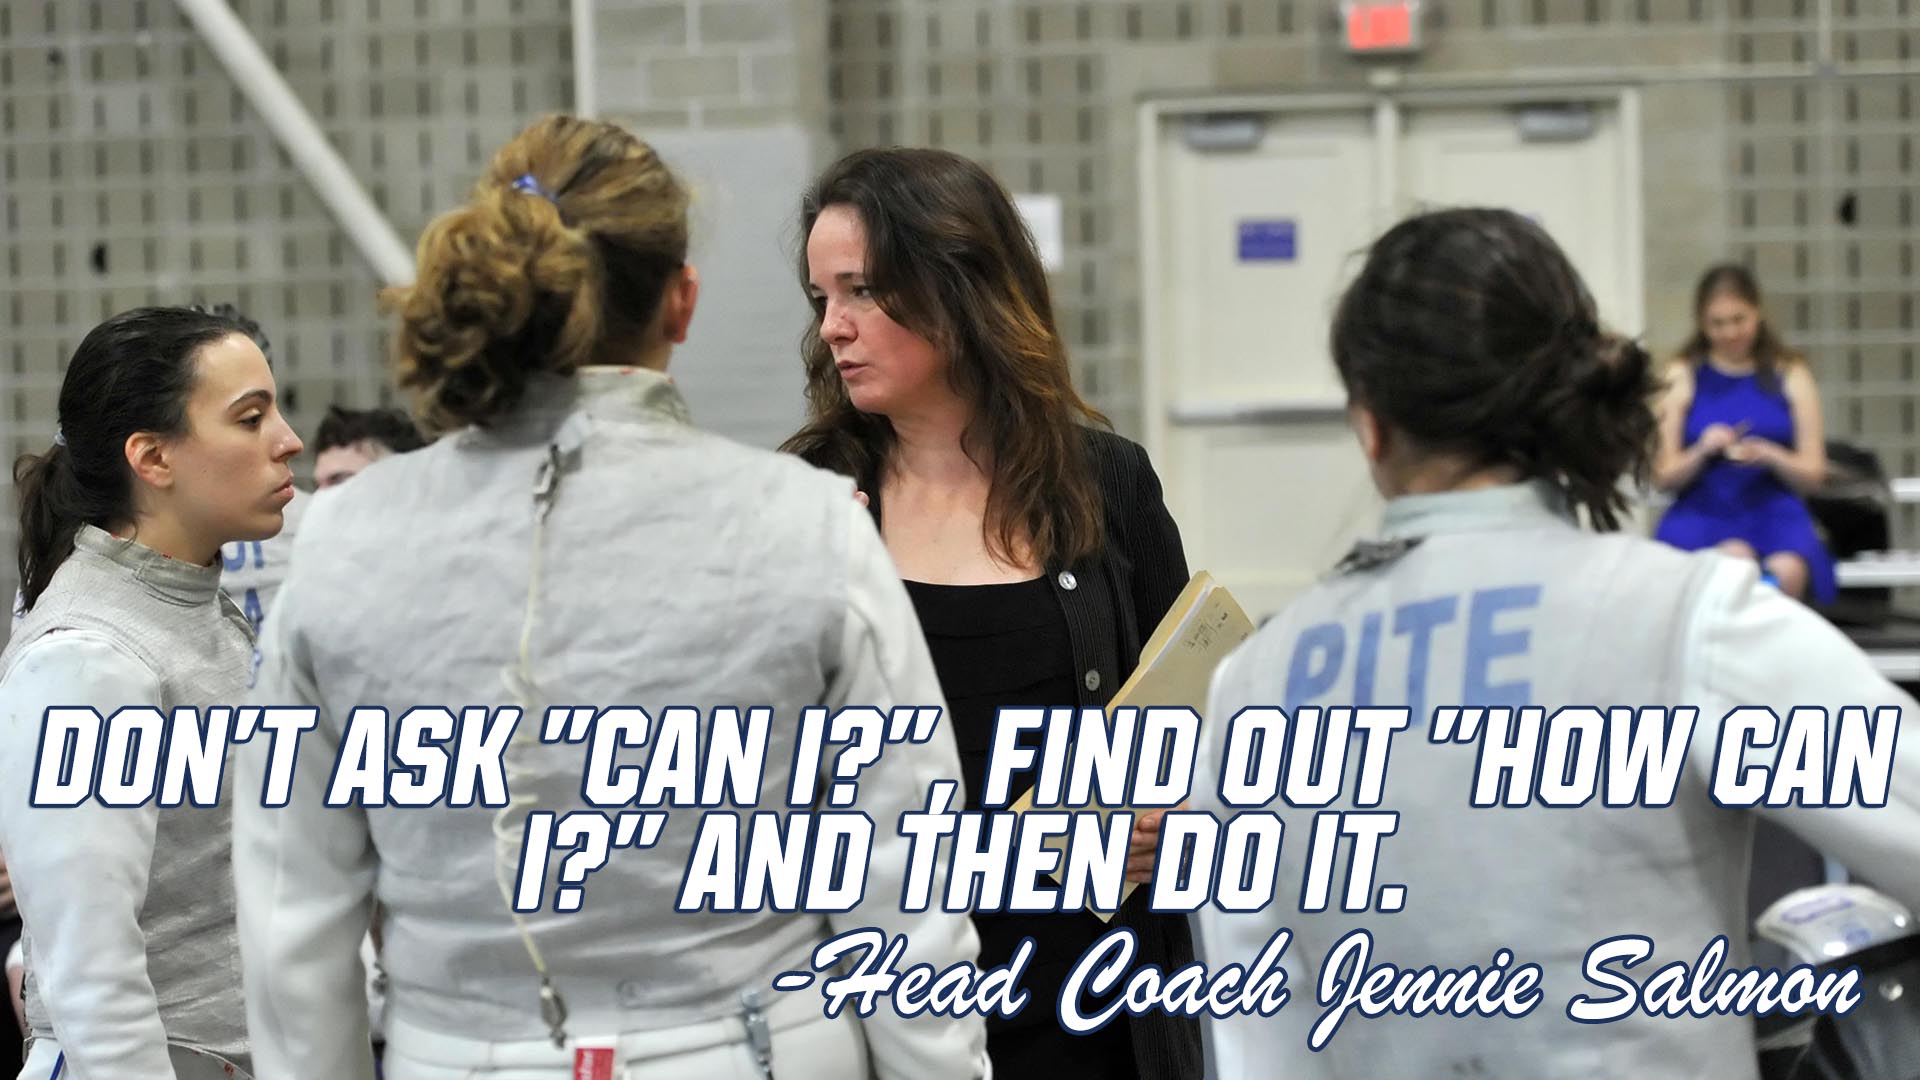 Fencing coach Jennie Salmon talking to fencers with text: Don't ask "Can I"?, find out "How can I?" and then do it. 